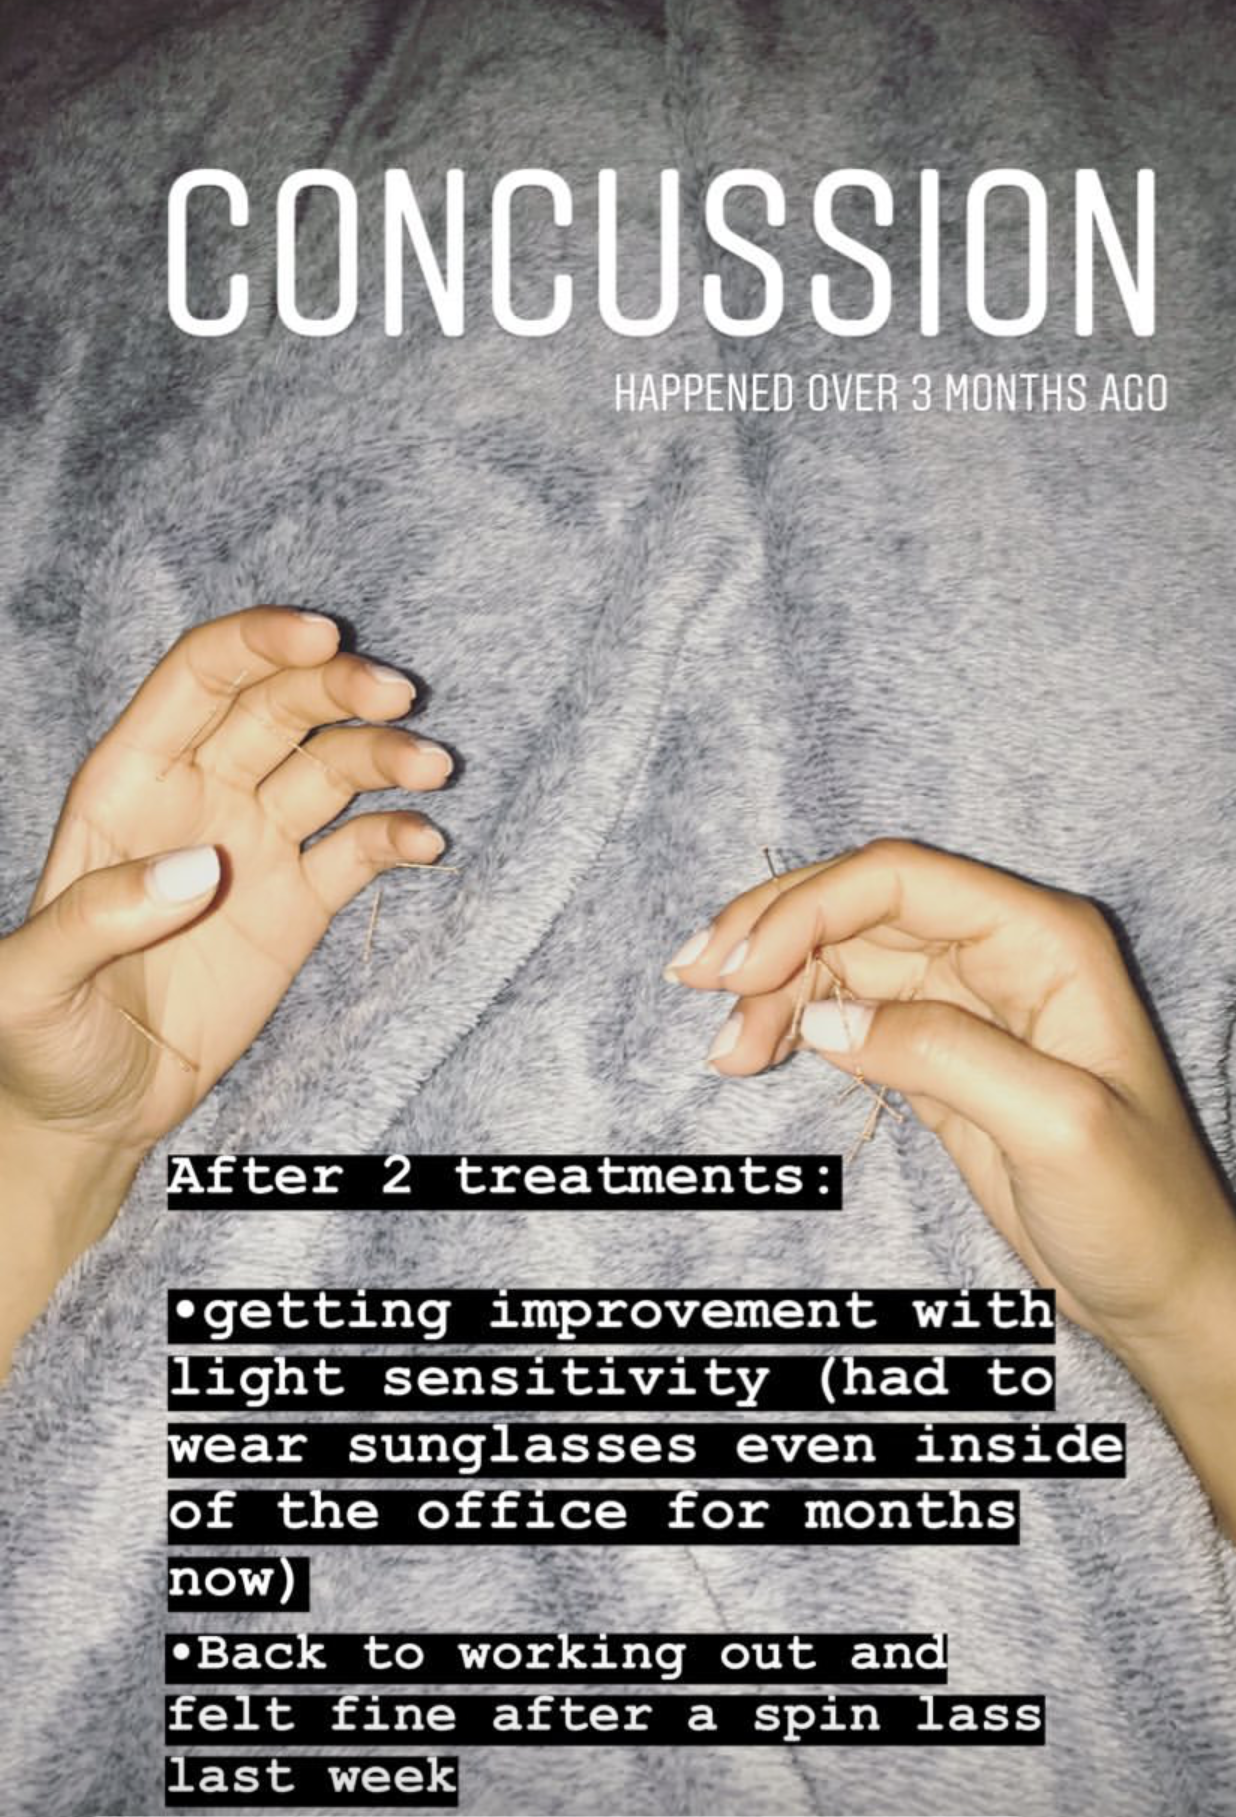  SuJok acupuncture in Vancouver used on patient with severe light sensitivity due to a concussion. Treatment was successful and resulted in reduction of light sensitivity and ability to go back to work 